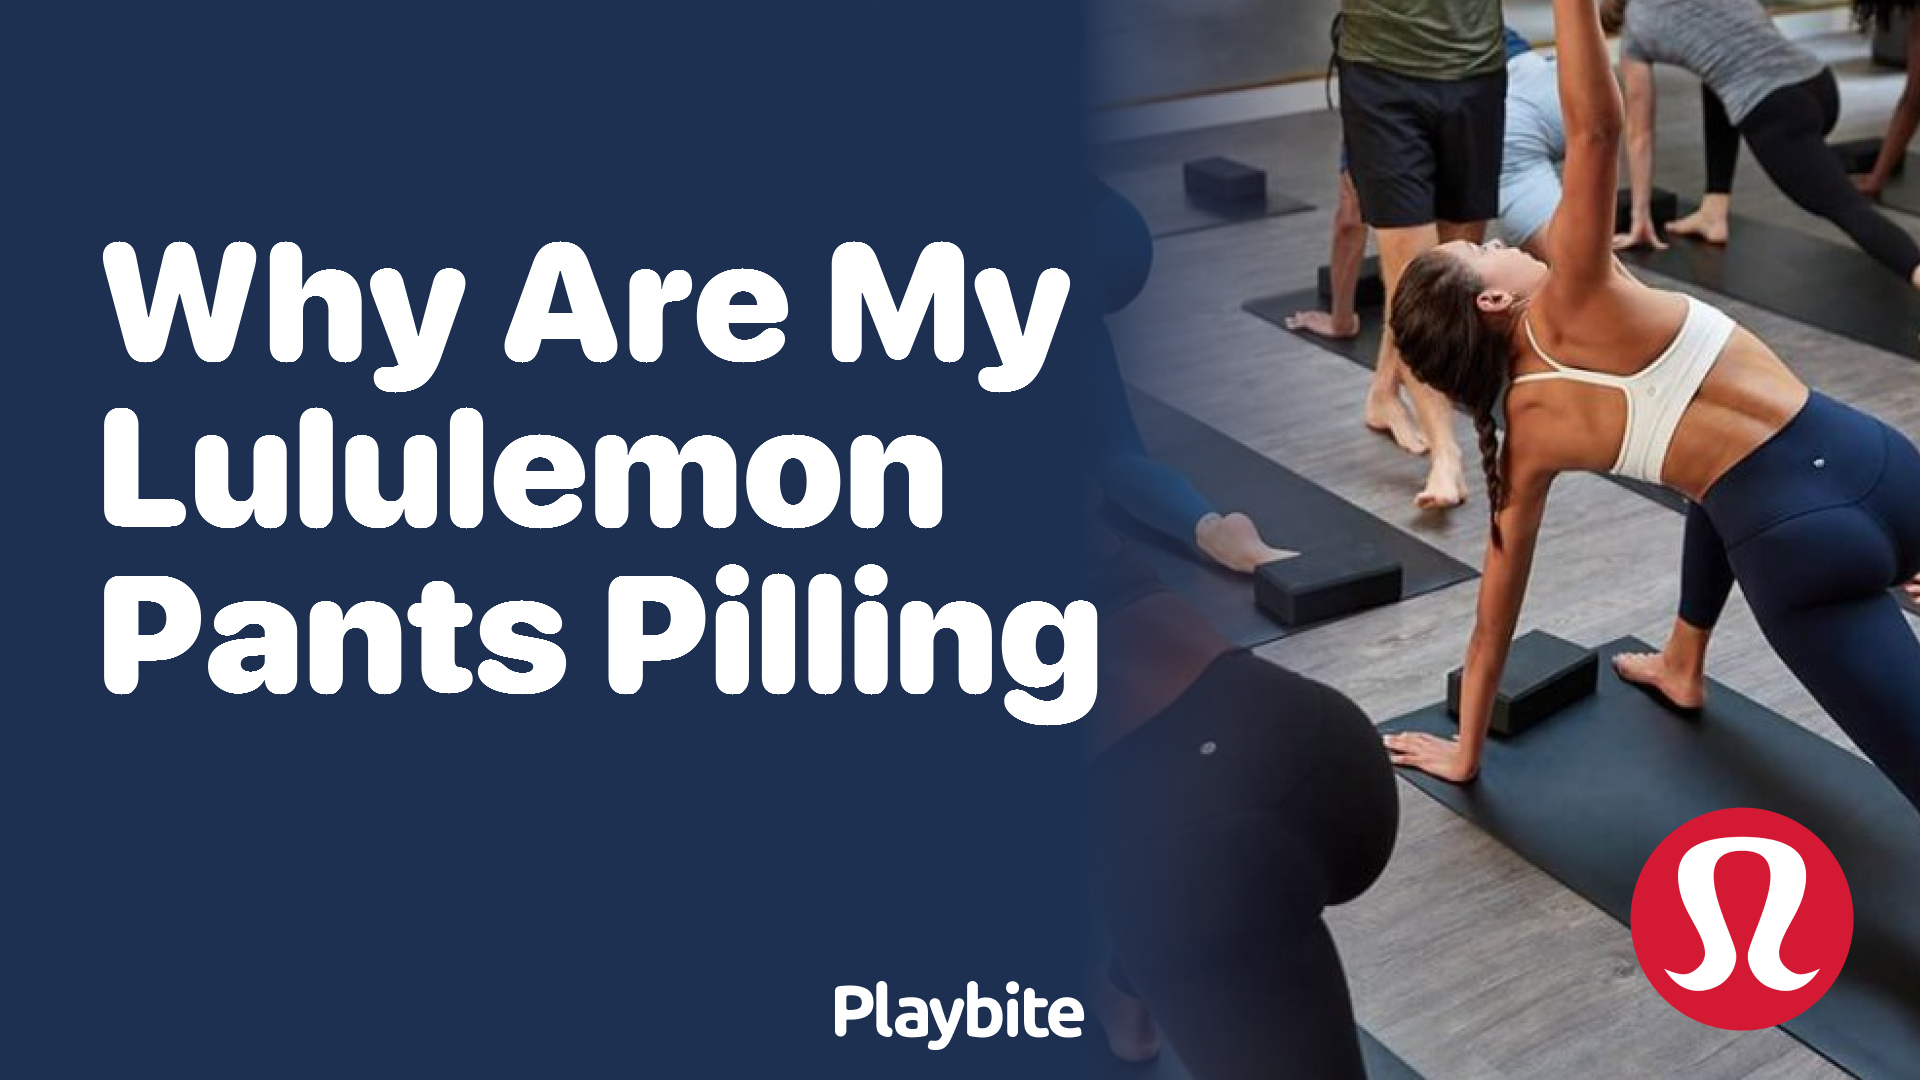 Why Do My Lululemon Pants Roll Down at the Waist? - Playbite